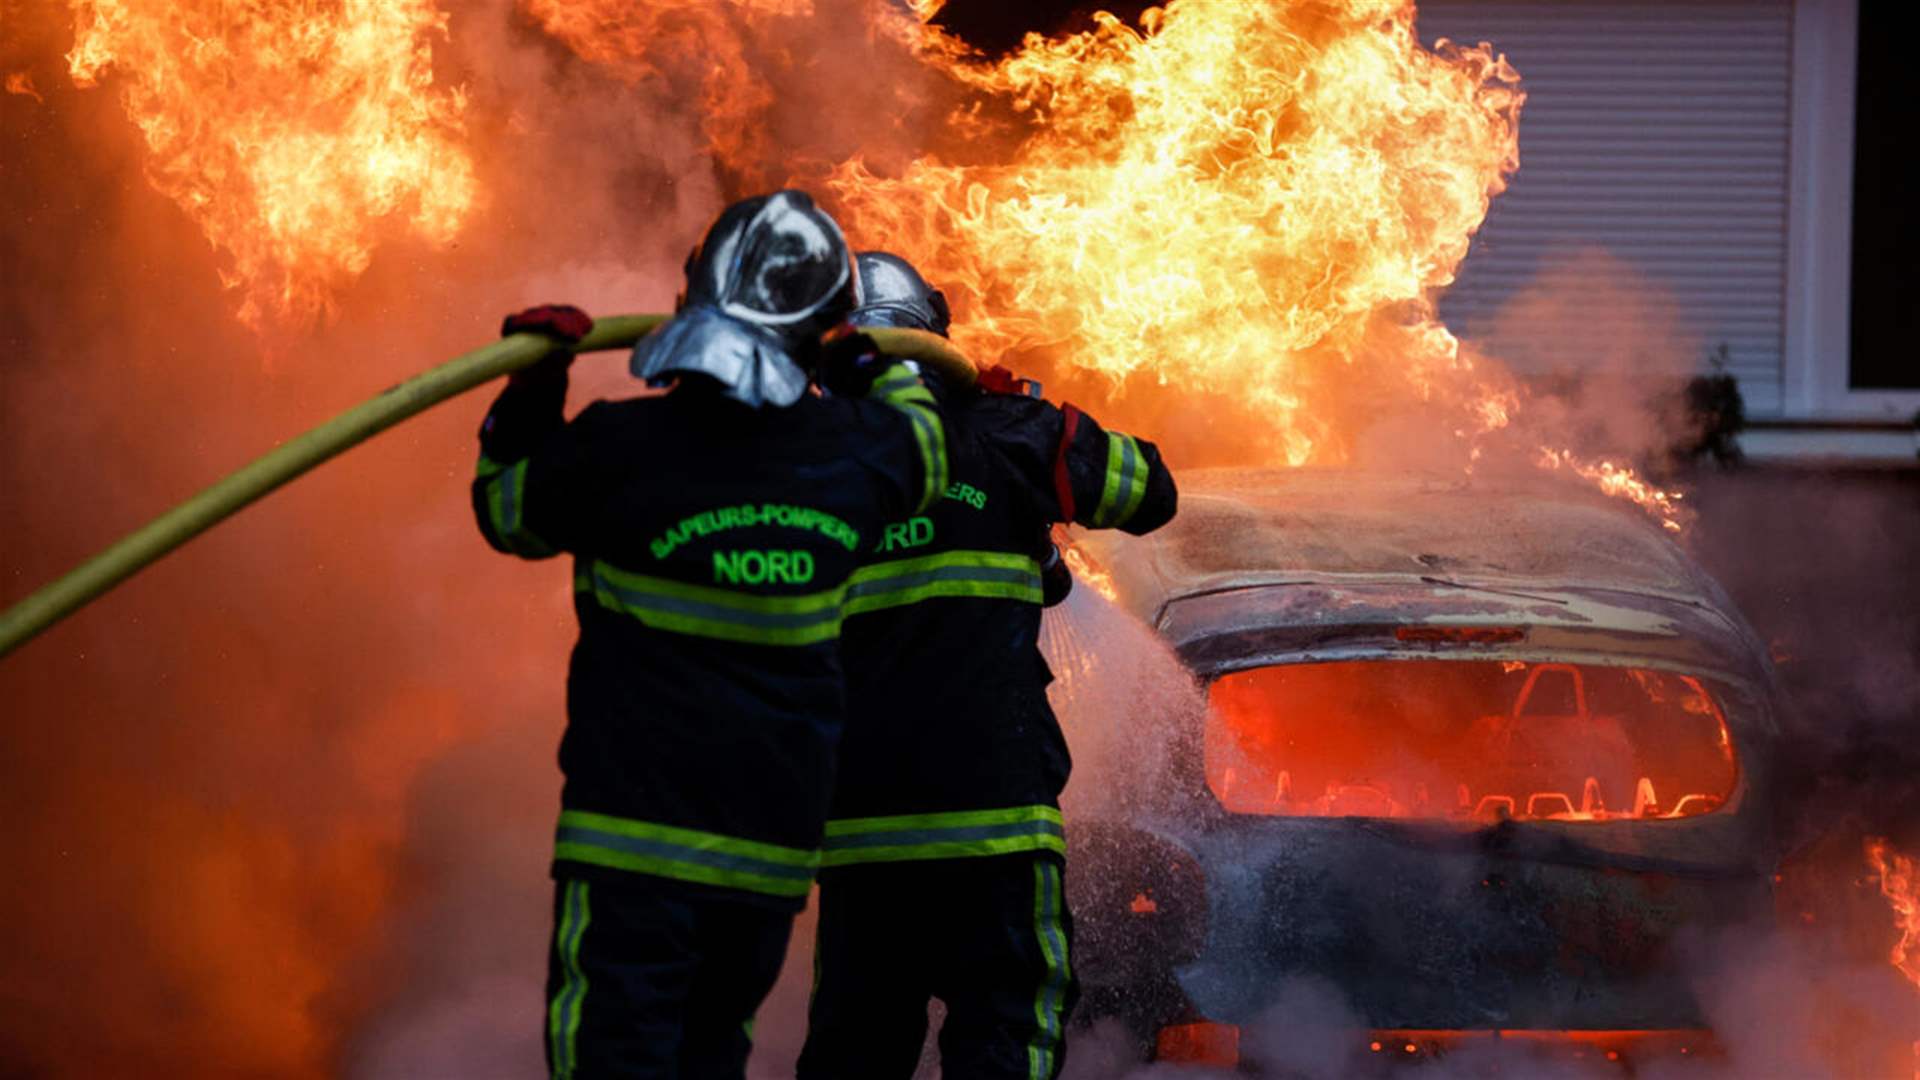 Night of fires, looting in Lille as protests sweep France